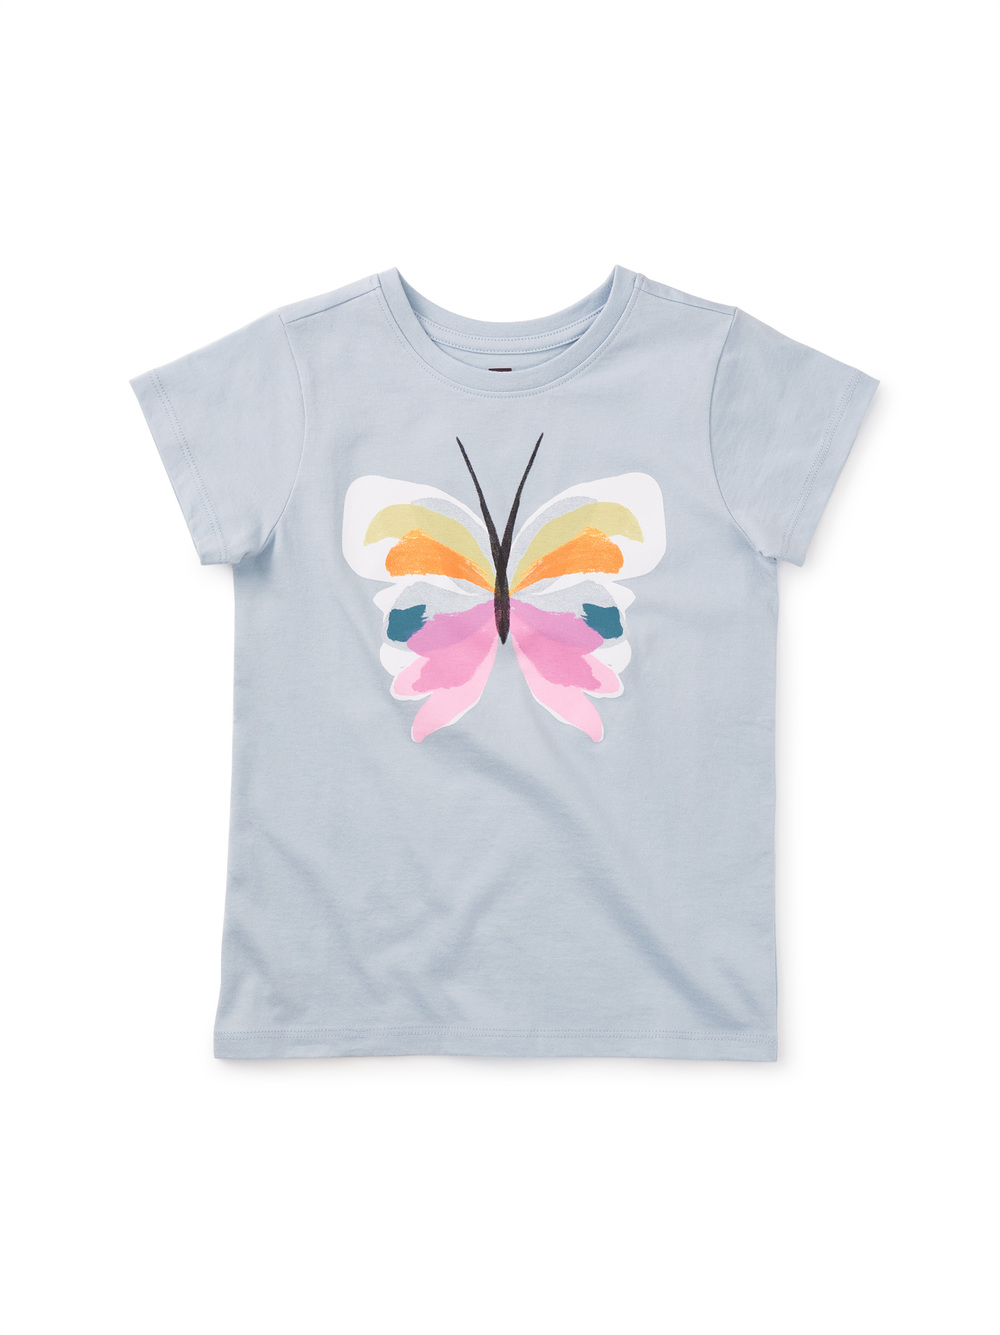 Painted Butterfly Graphic Tee